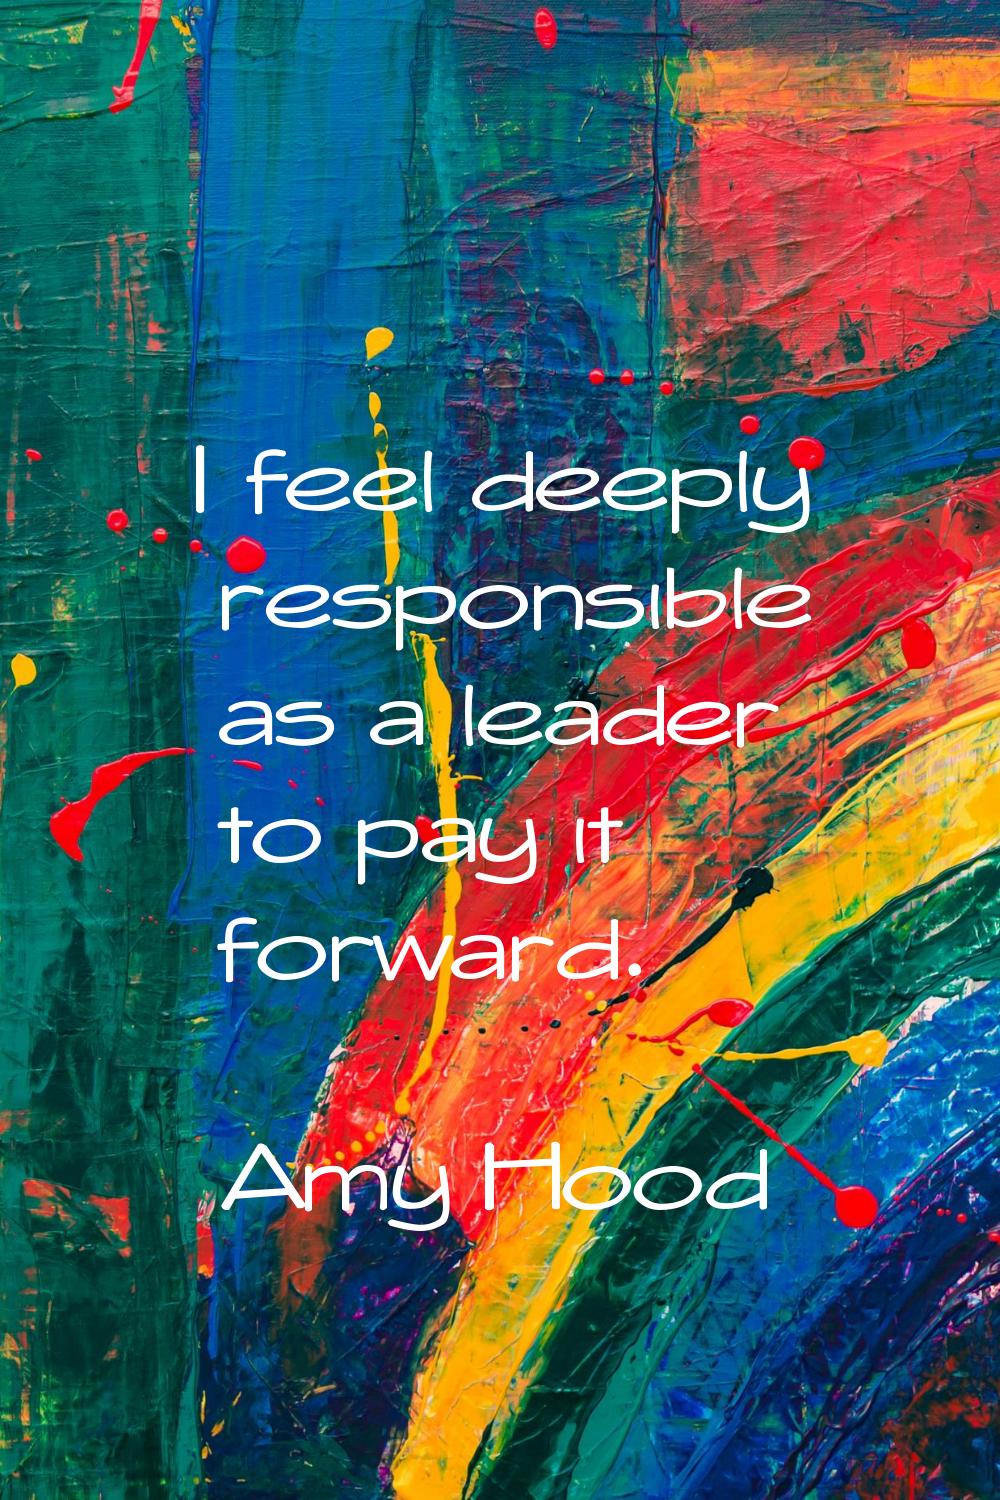 I feel deeply responsible as a leader to pay it forward.